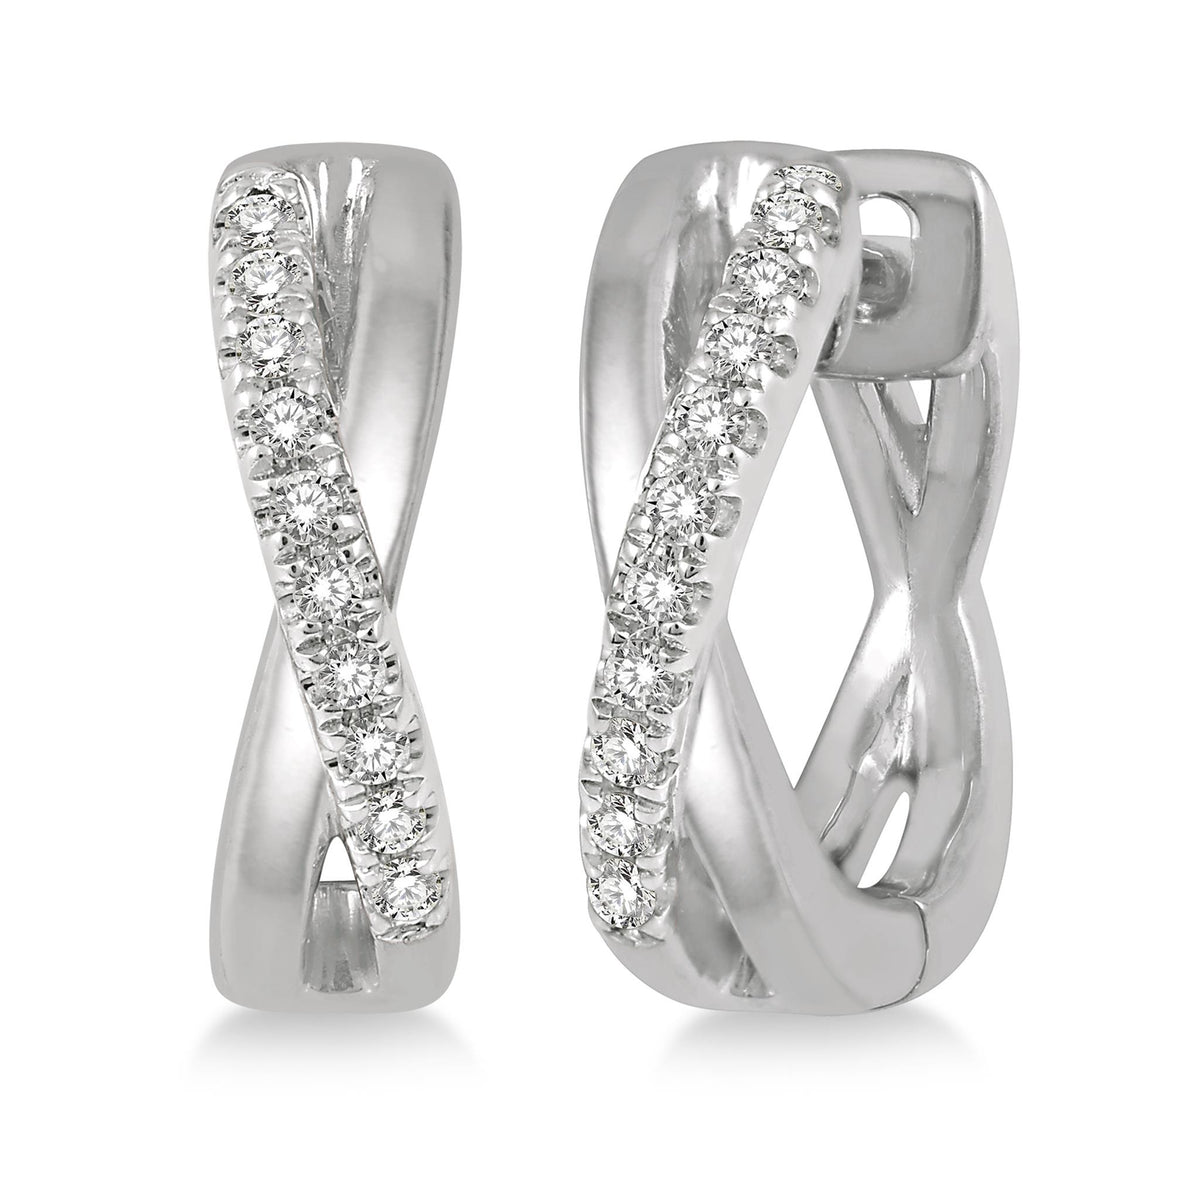 Lasker Petites-10Kt White Gold Round Hoop Earrings With 0.10ct Diamonds